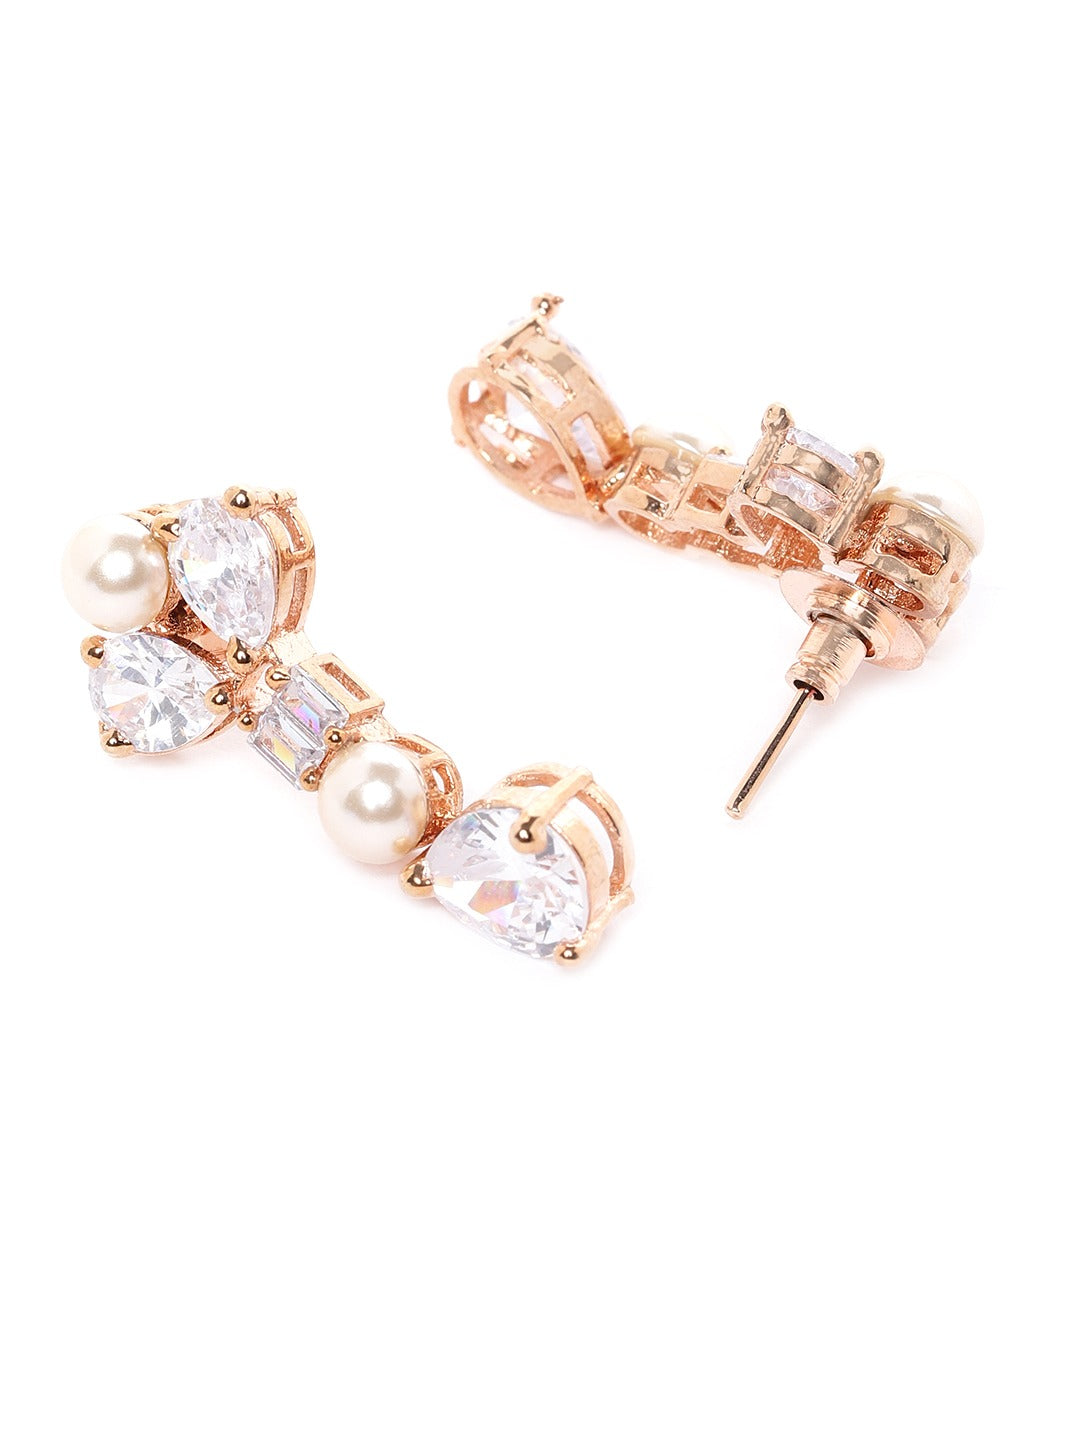 Off-White Rose Gold-Plated AD-Studded Beaded Handcrafted Jewellery Set